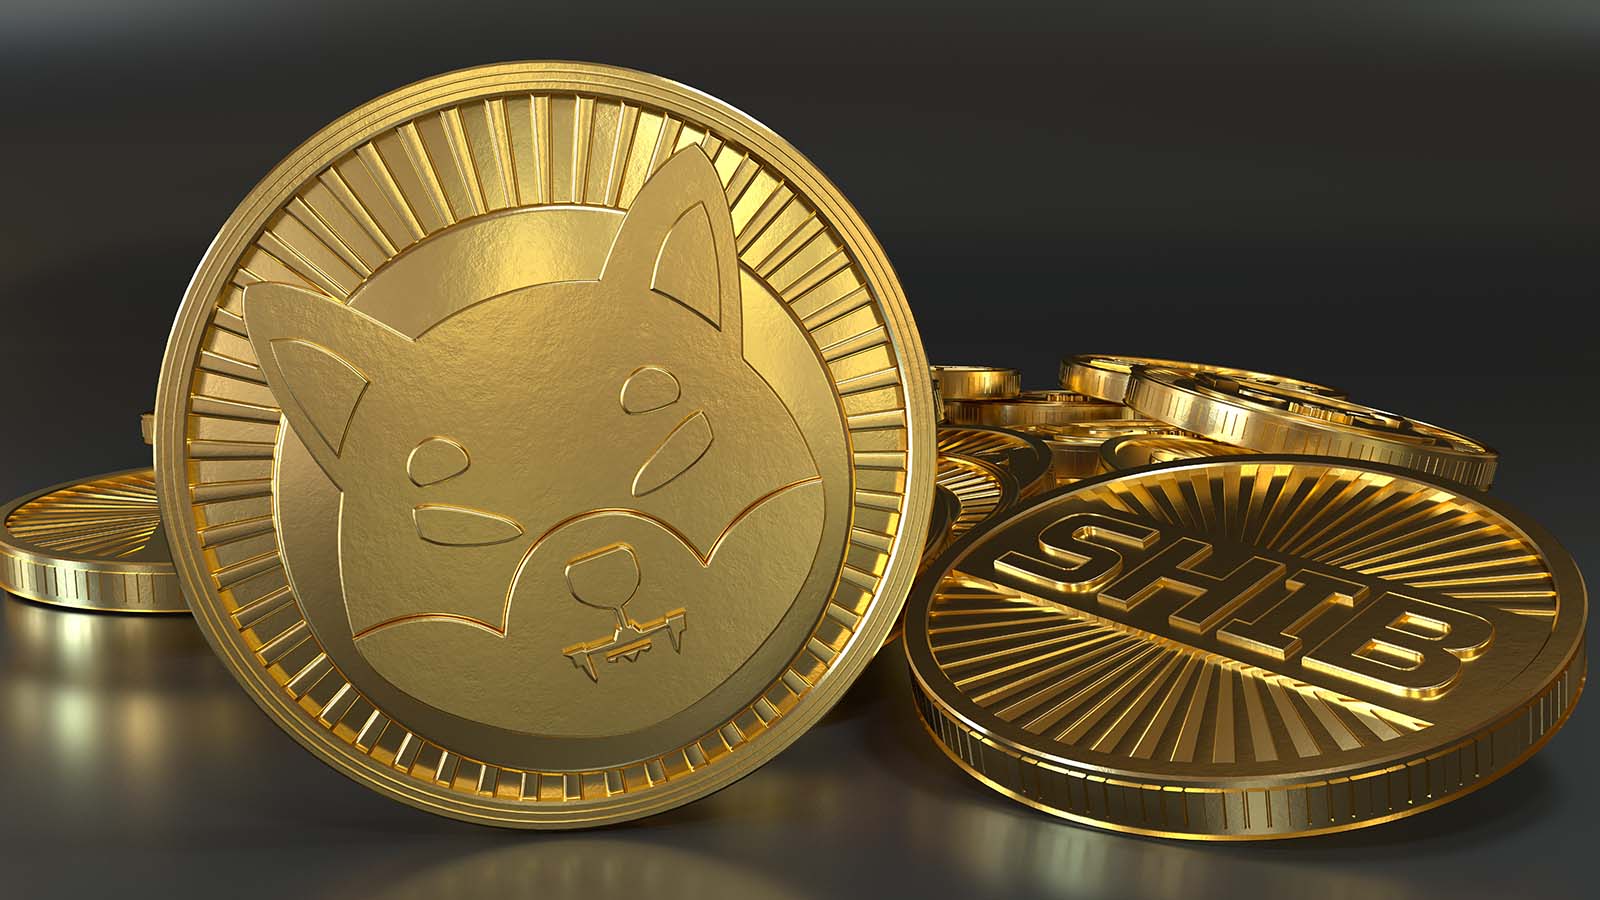 Concept art for the Shiba Inu cryptocurrency representing price predictions.